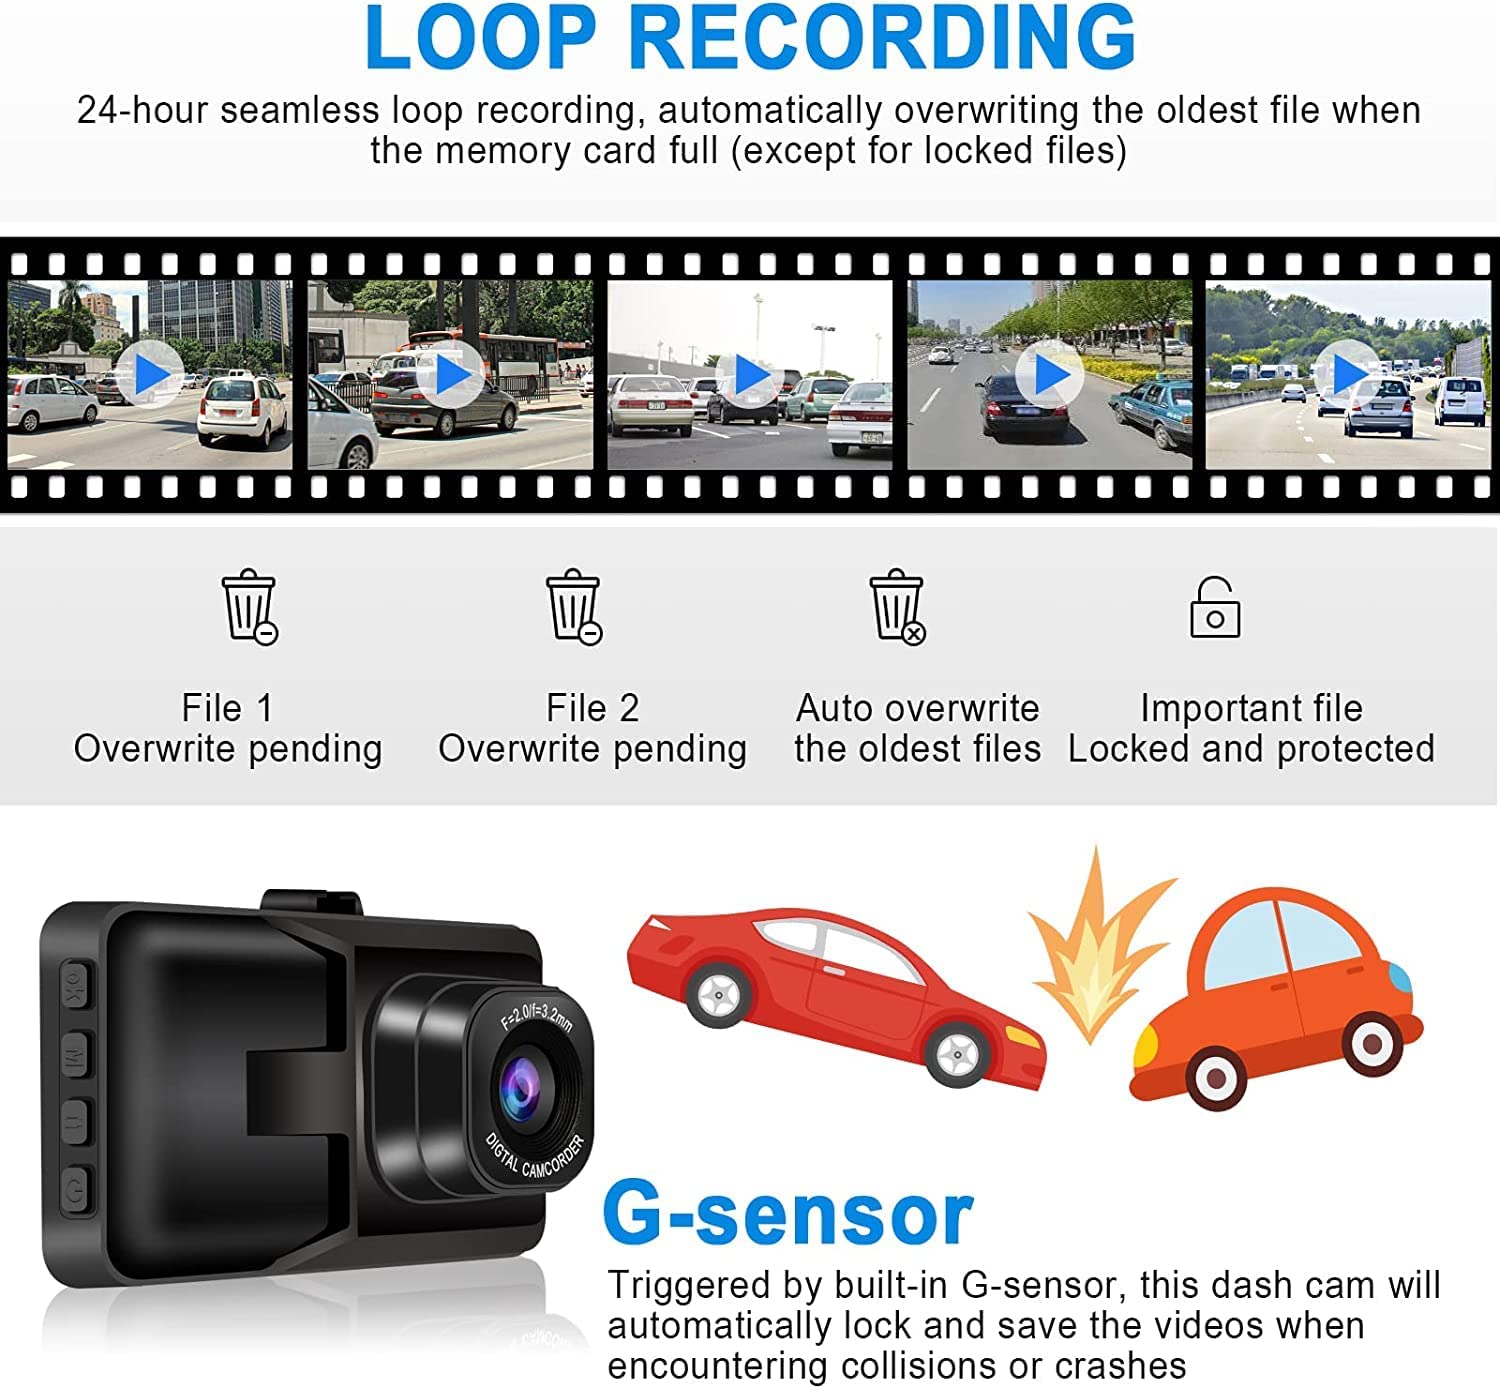 Supad Dash Cam,Dash Camera for Car,3 Inch LCD Screen,720P Full HD Car Dashboard Recorder,120° Wide Angle Dashcam,Night Vision,WDR, Motion Detection, Parking Mode